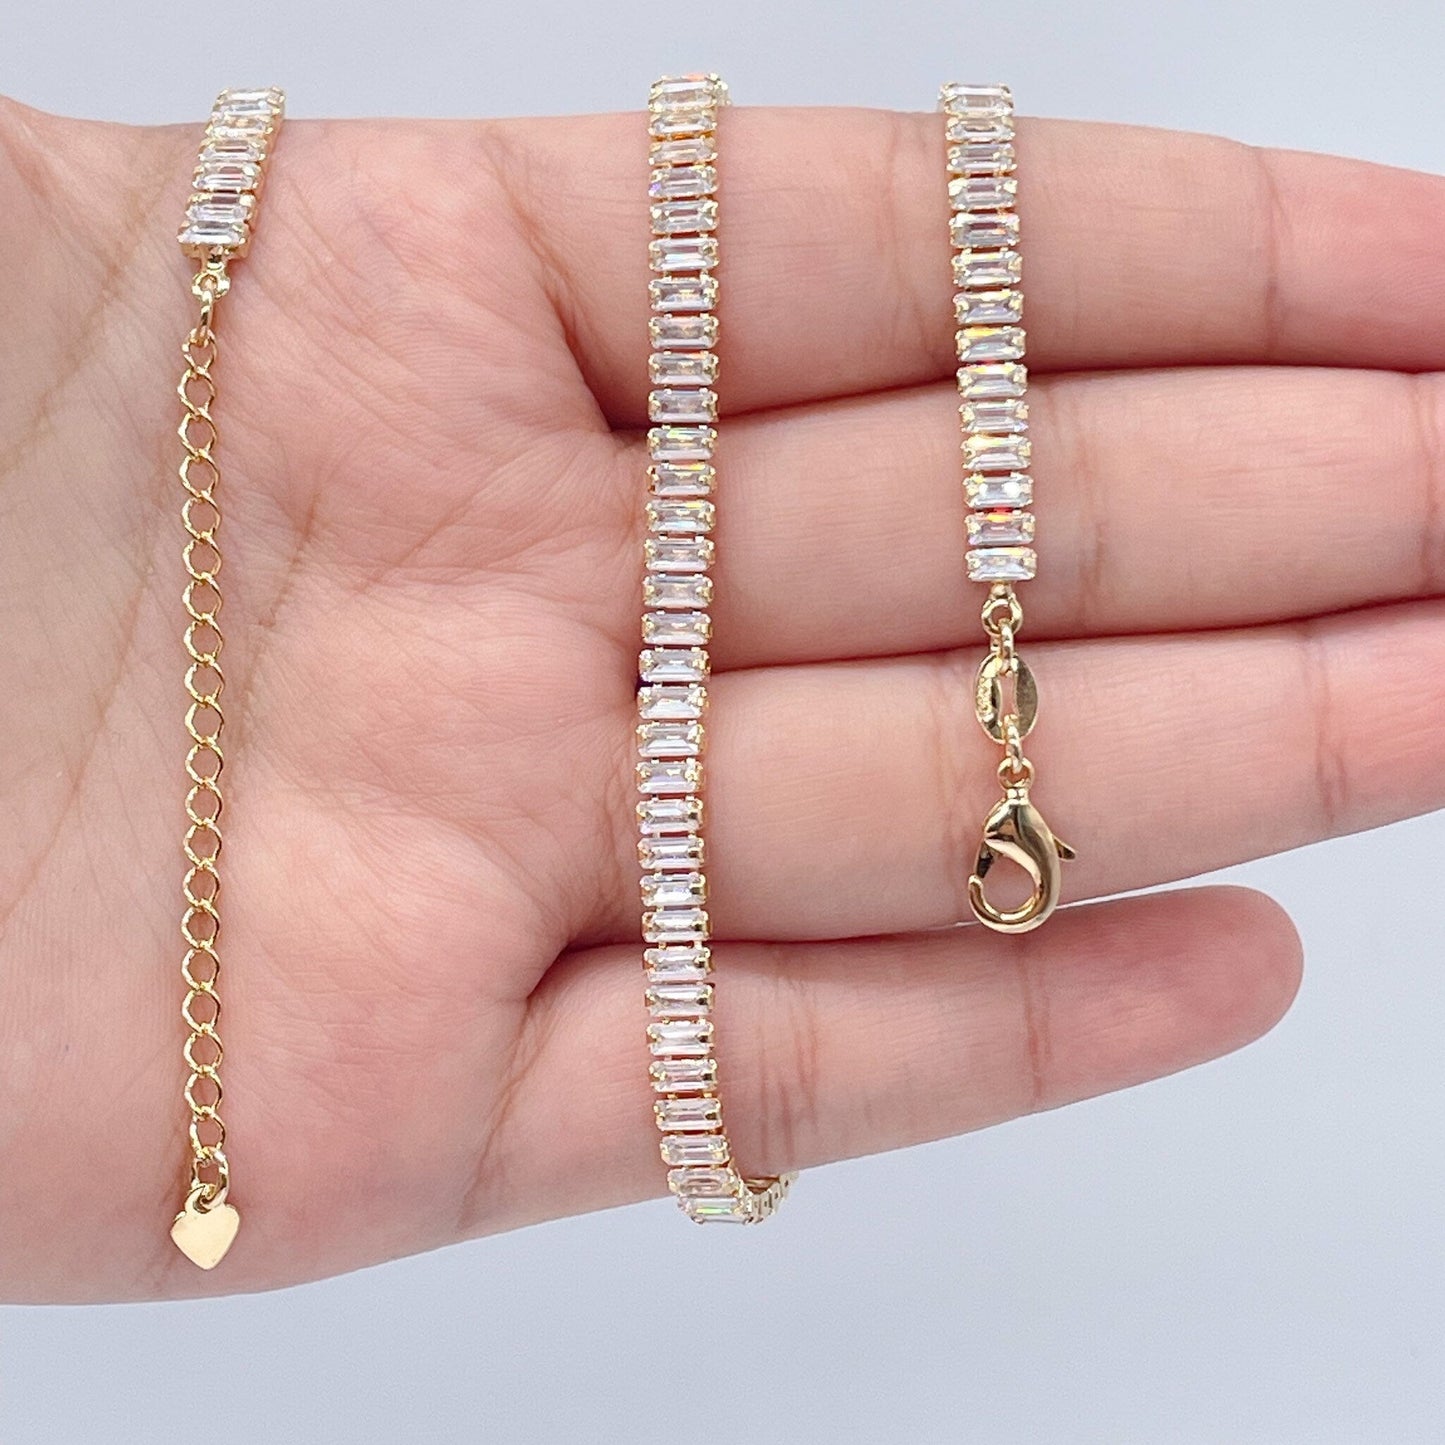 Gorgeous 18k Gold Layered Baguette Cubic Zirconia Set Choker Necklace and